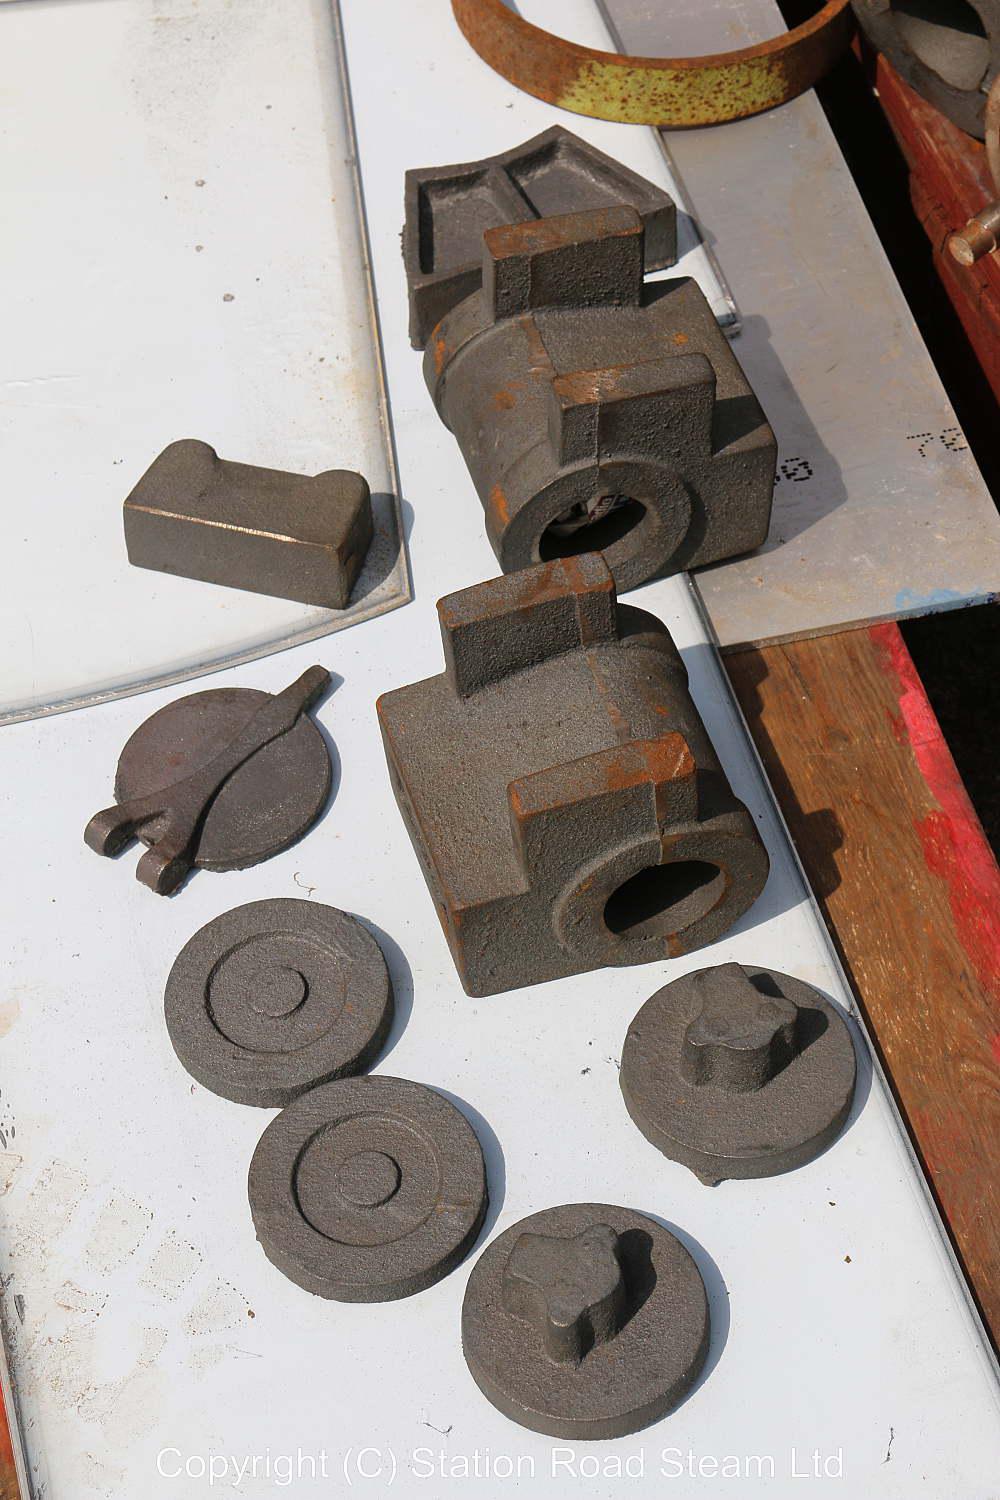 Parts & castings for 